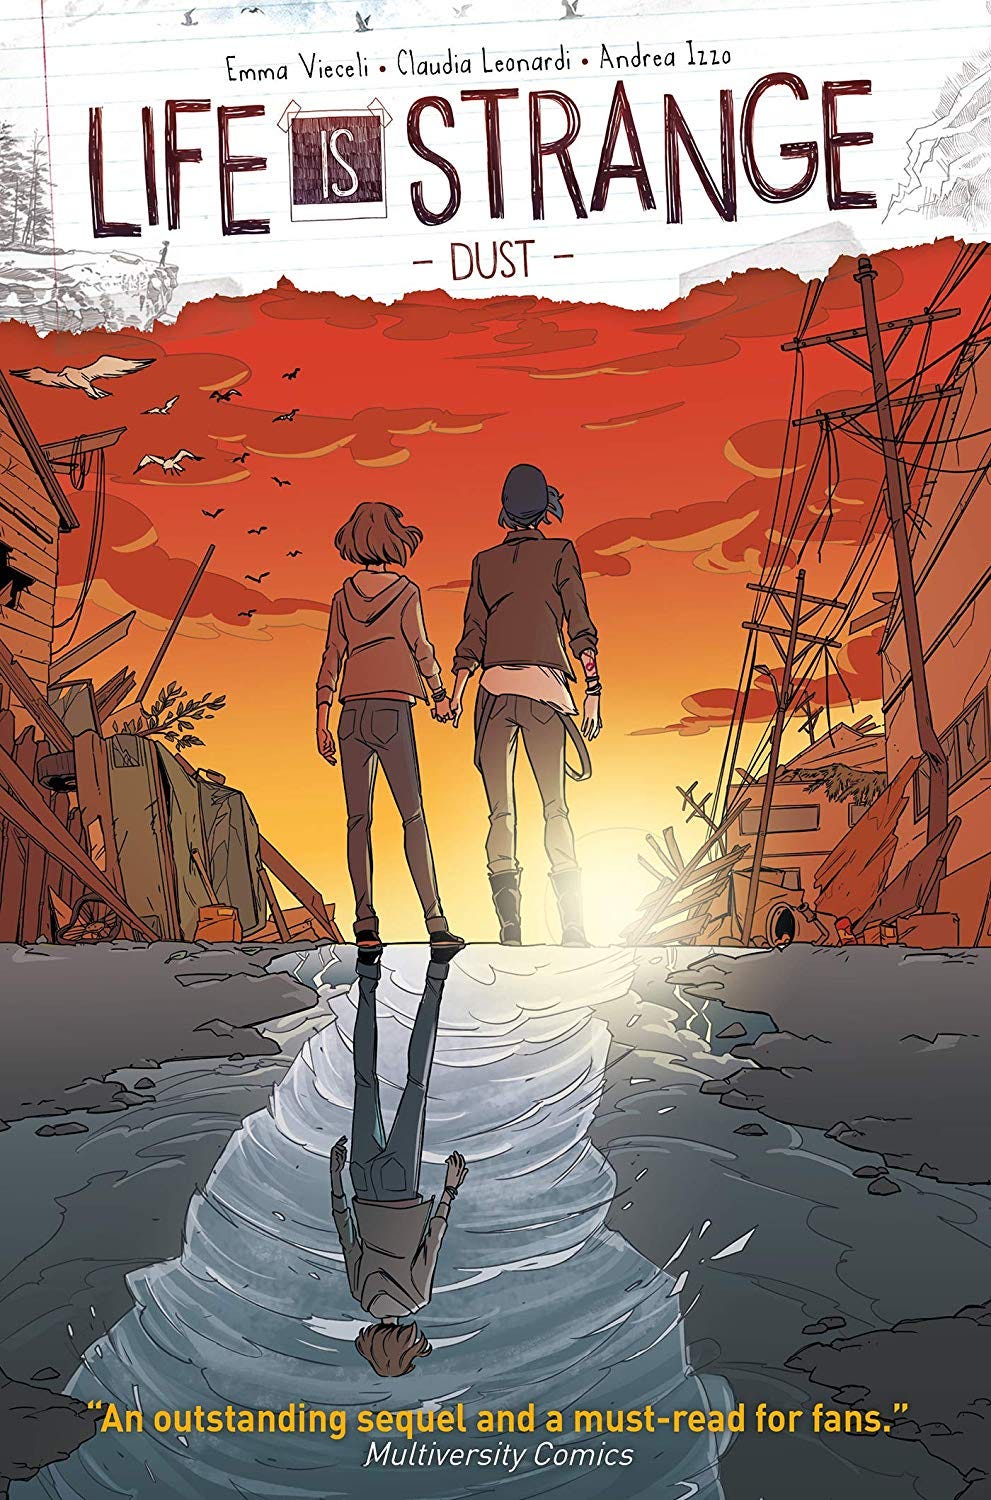 Comic book cover with Life is Strange titled on top, with the subtitle “Dust” Max and Chloe have their backs to us, holding hands and standing in the middle of the destruction of Arcadia Bay. The road beneath them reflects Mac alone, facing a storm.